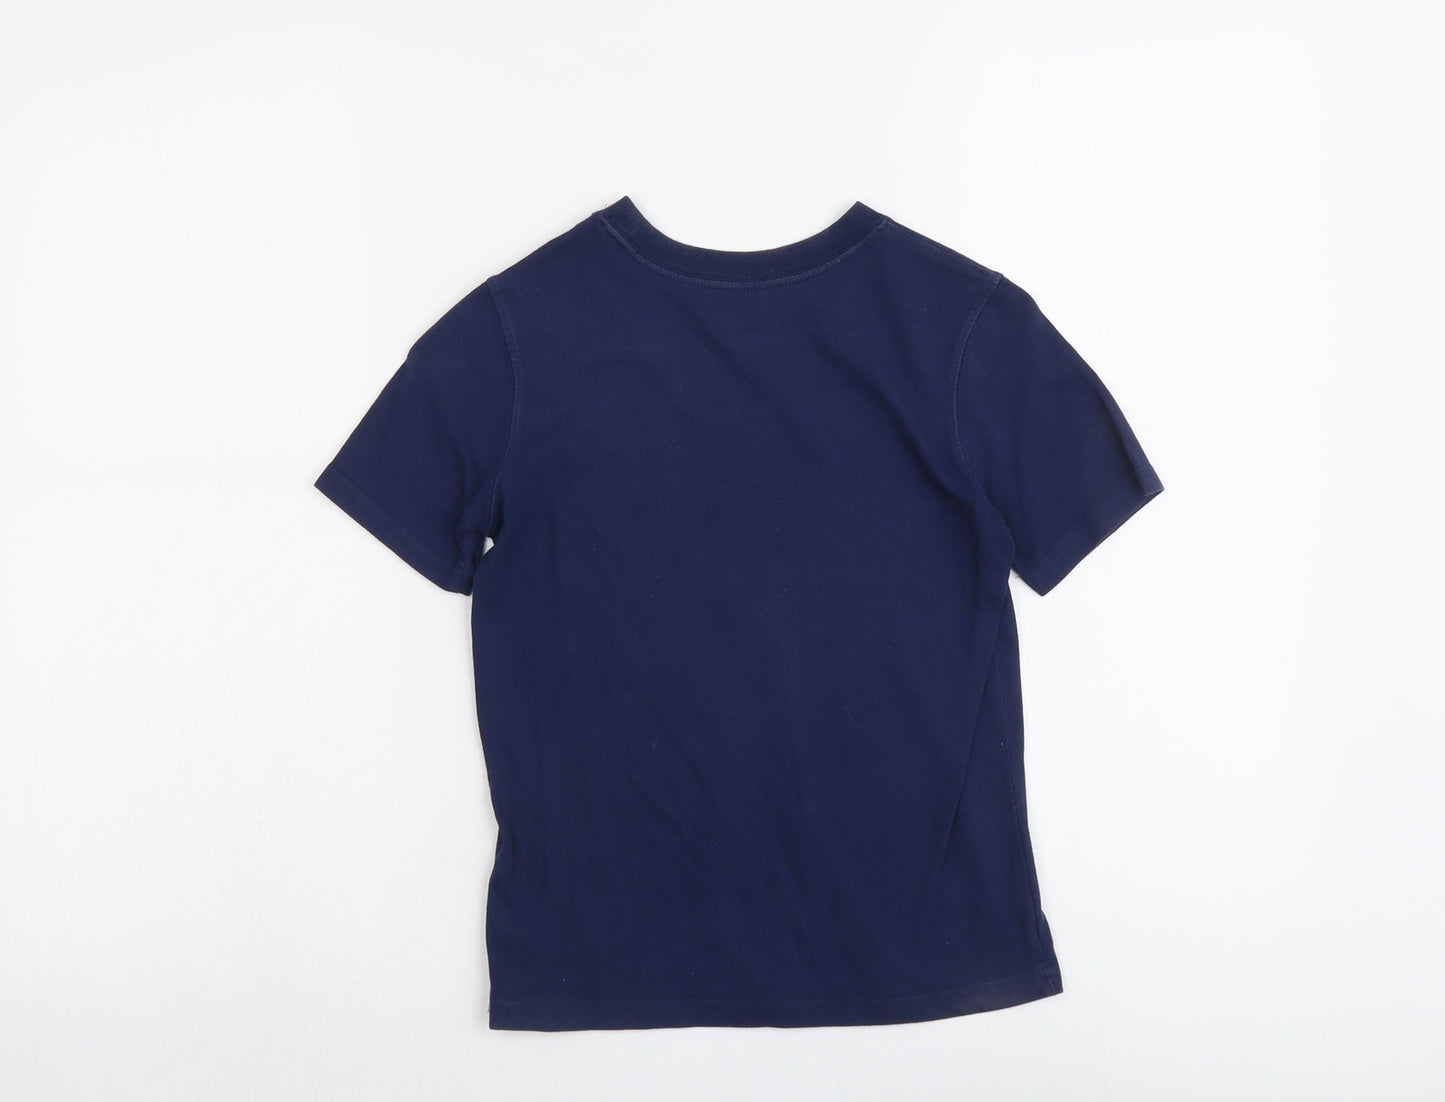 Gap Boys Blue Cotton Pullover T-Shirt Size 6-7 Years Round Neck Pullover - San Francisco